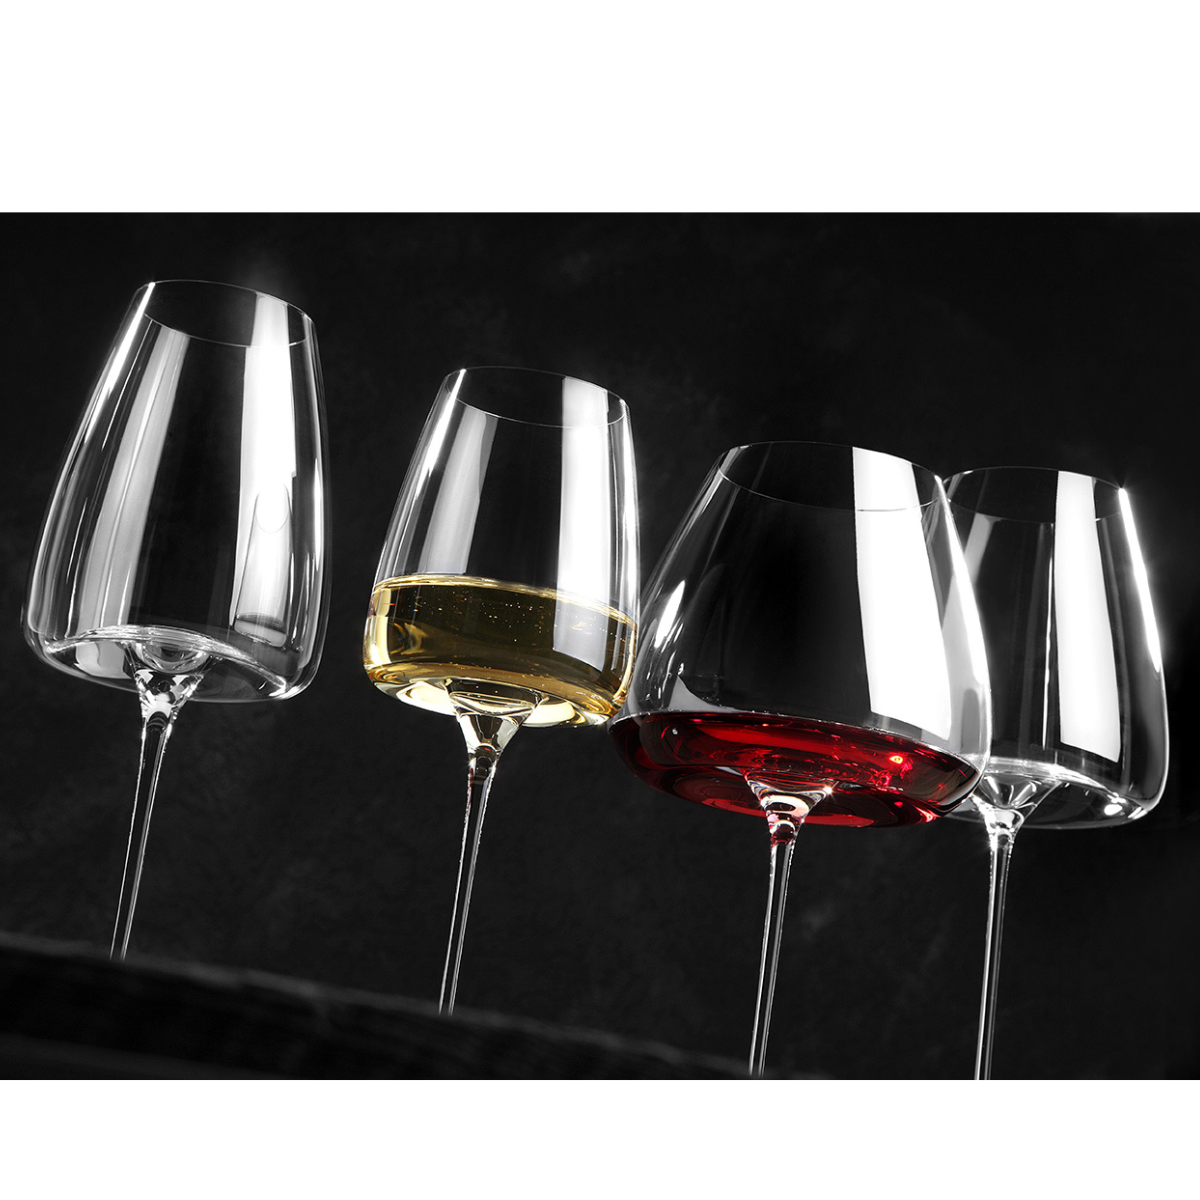 Ziher Vision Balance Wine Glass in Single Pack Lead-free crystal made in Hungary